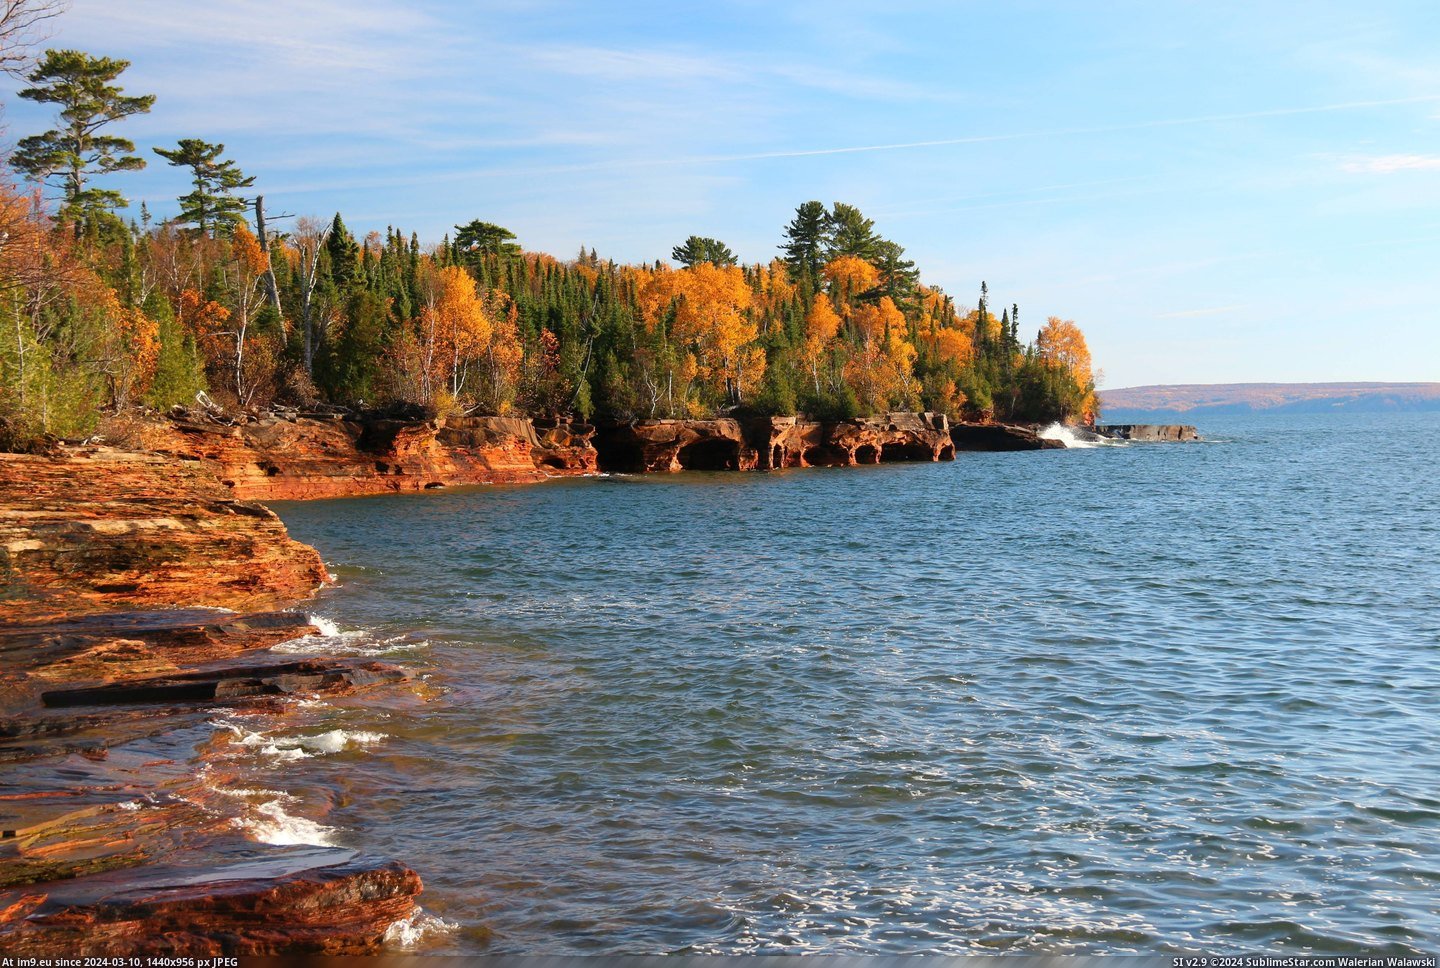 #National #Island #Fall #Wisconsin #4000x2667 #Apostle #Lakeshore #Islands #Devil #Colors [Earthporn] Fall colors on Devil's Island. Apostle Islands National Lakeshore, Wisconsin. [OC] [4000X2667] Pic. (Изображение из альбом My r/EARTHPORN favs))